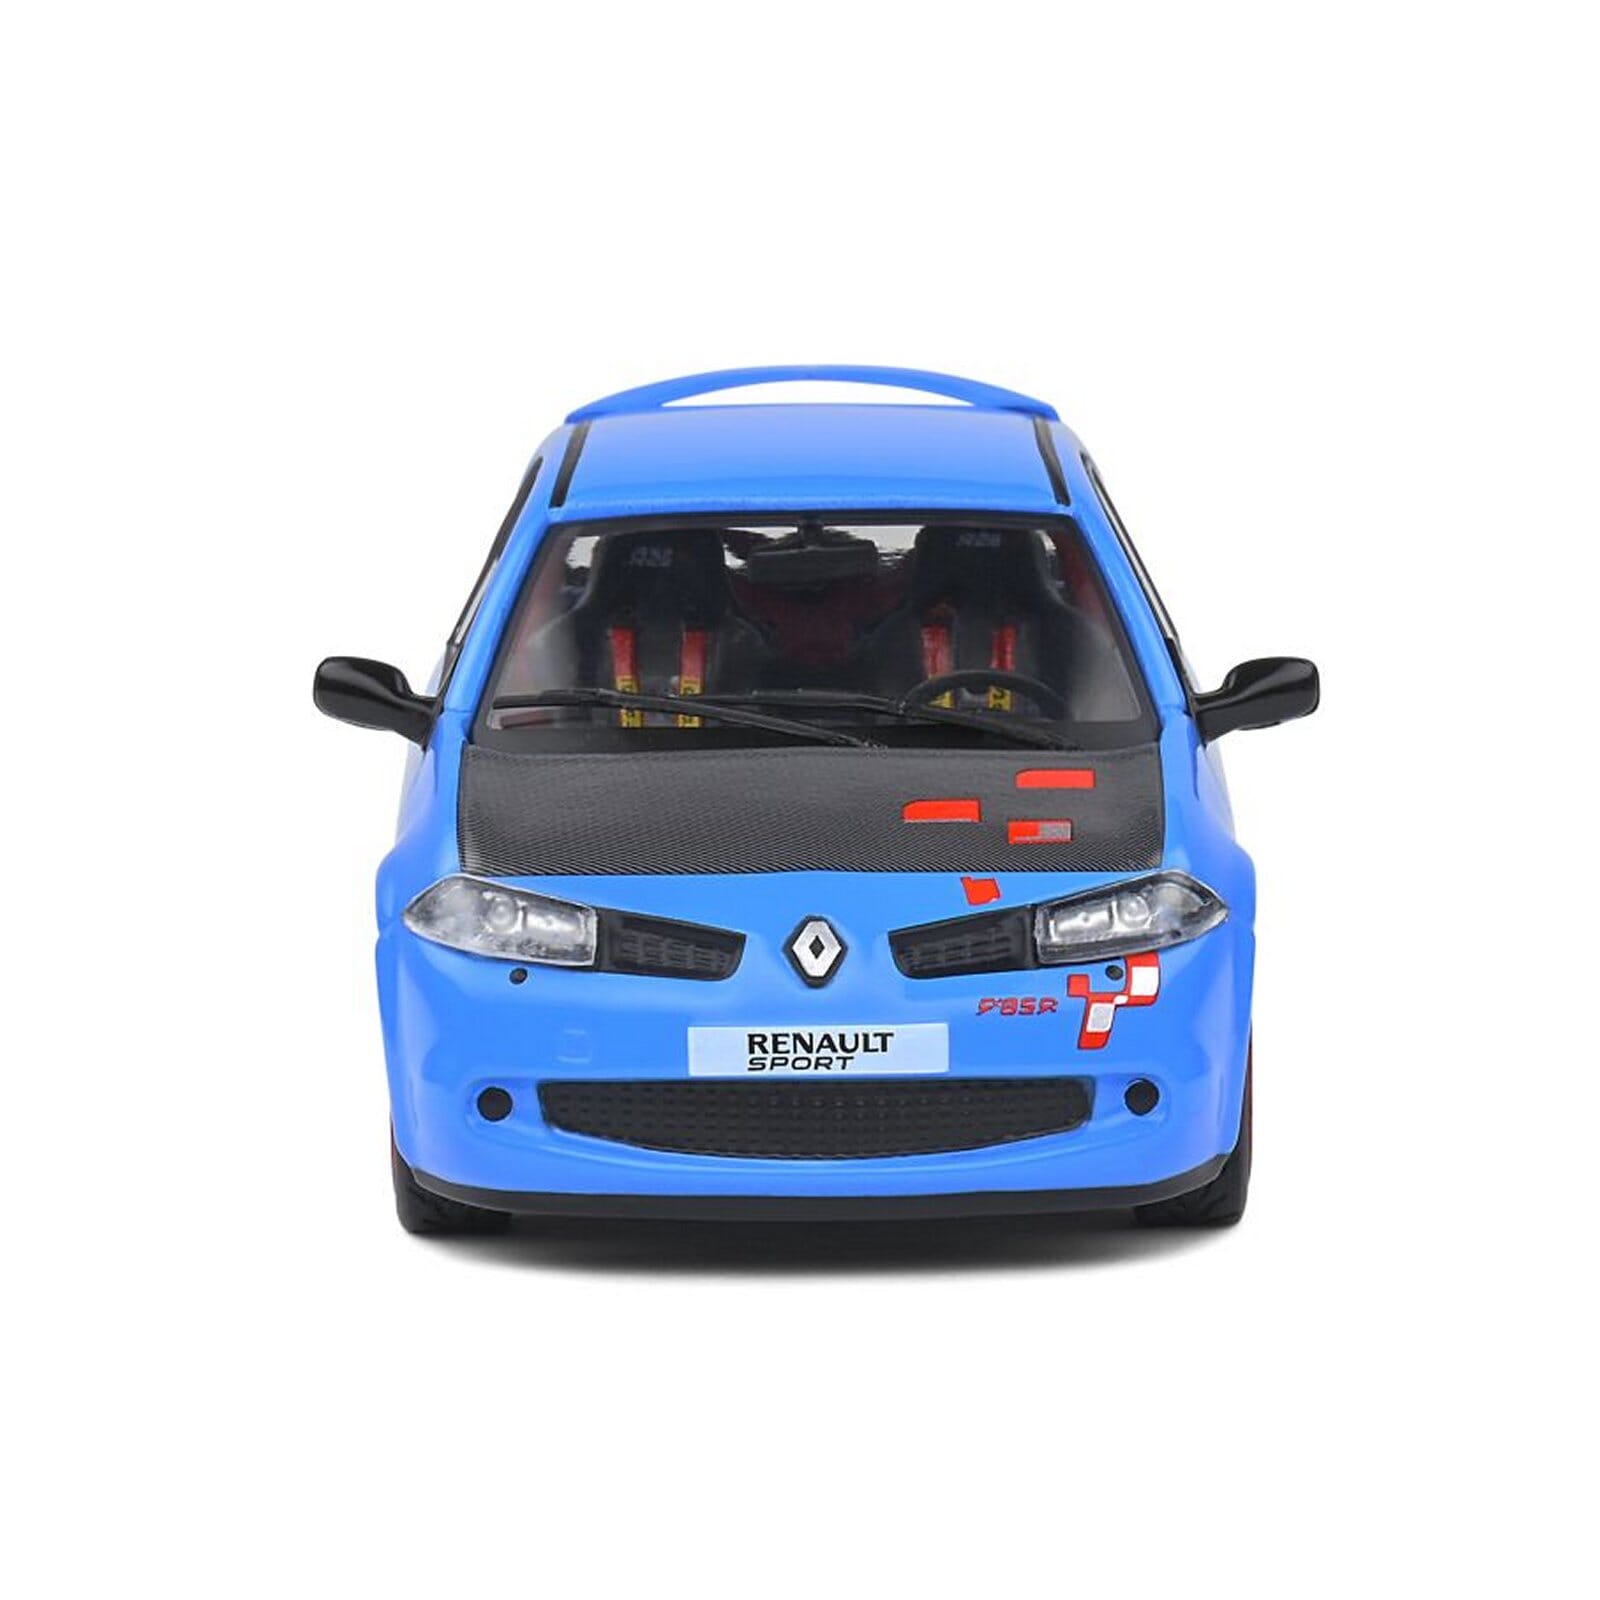 Renault Megane Diecast Model 1:43 scale Blue/Red Solido